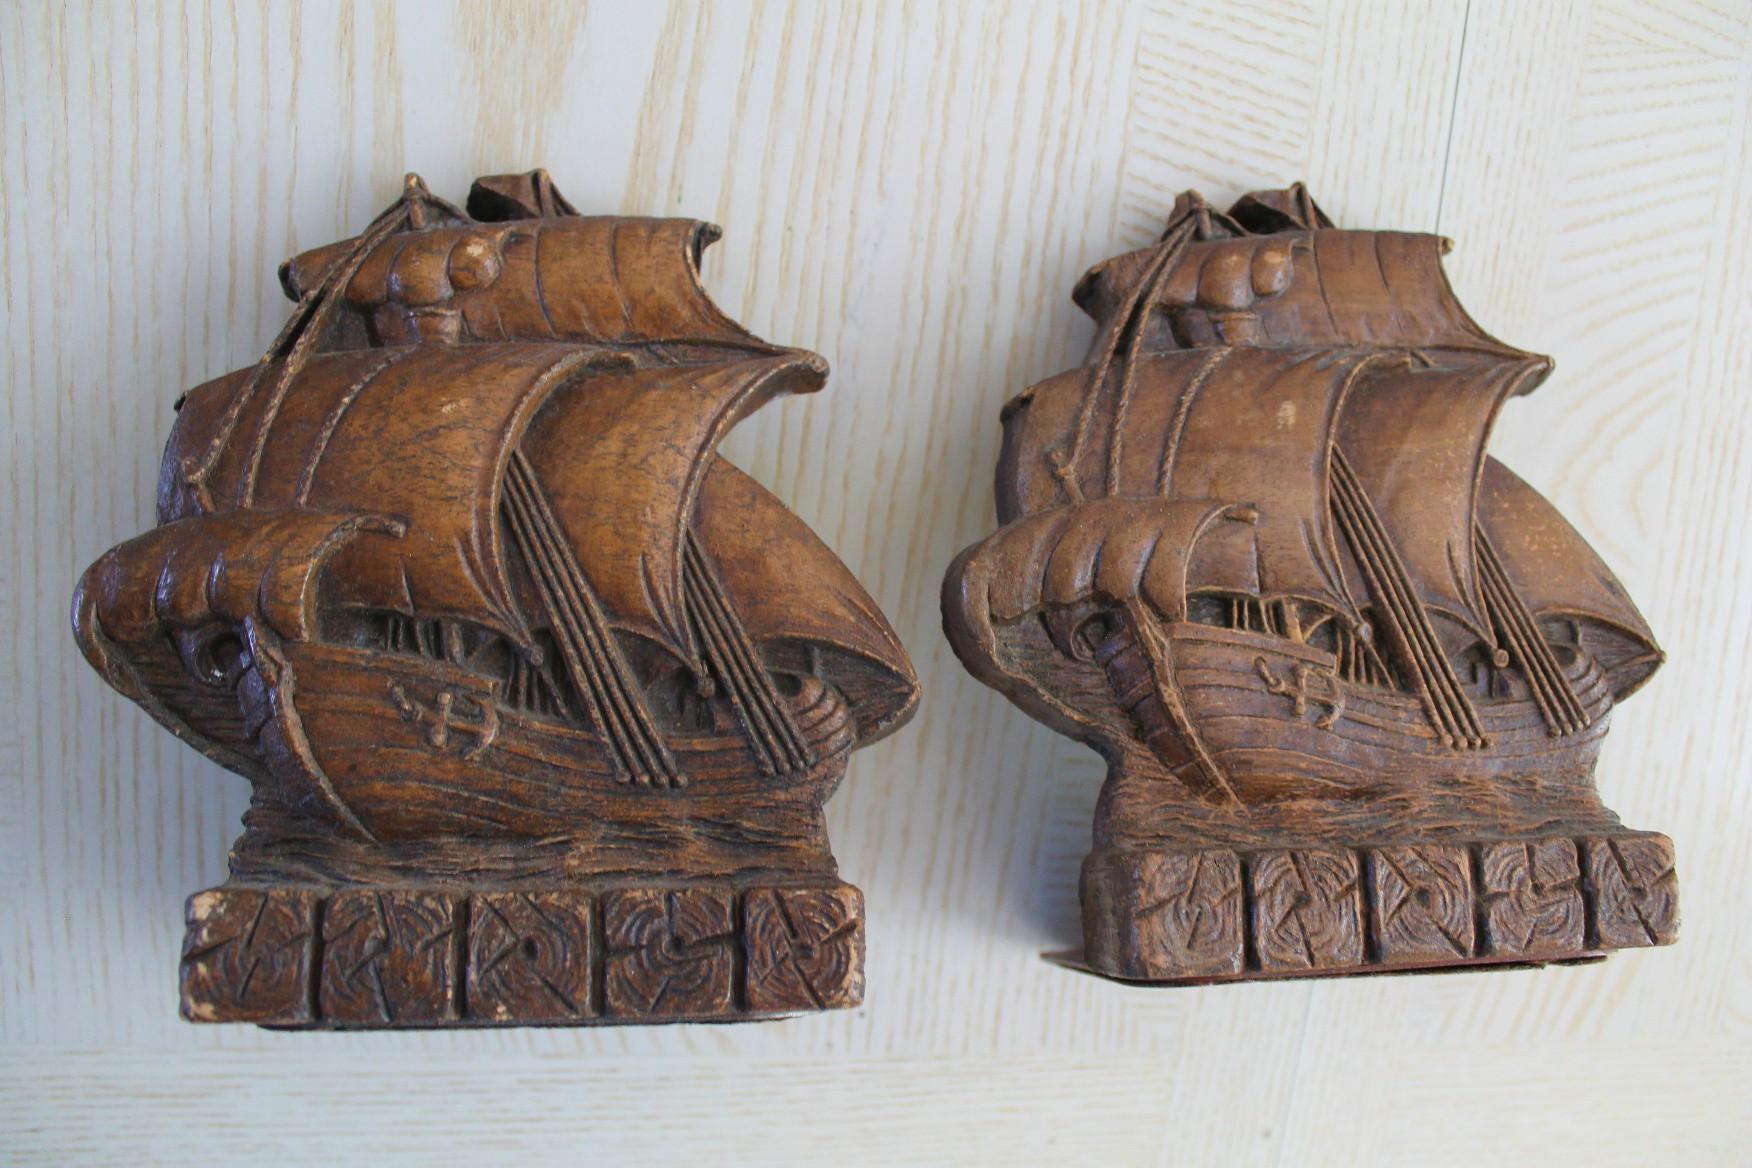 Wonderful!

1920s  PAIR
GALLEON SHIP 
BOOKENDS

This is a marvelous early 20th century pair of Galleon sculptured bookends! This pair were clearly designed to capture the romance of reading and how books took you on adventures now, the way galleons